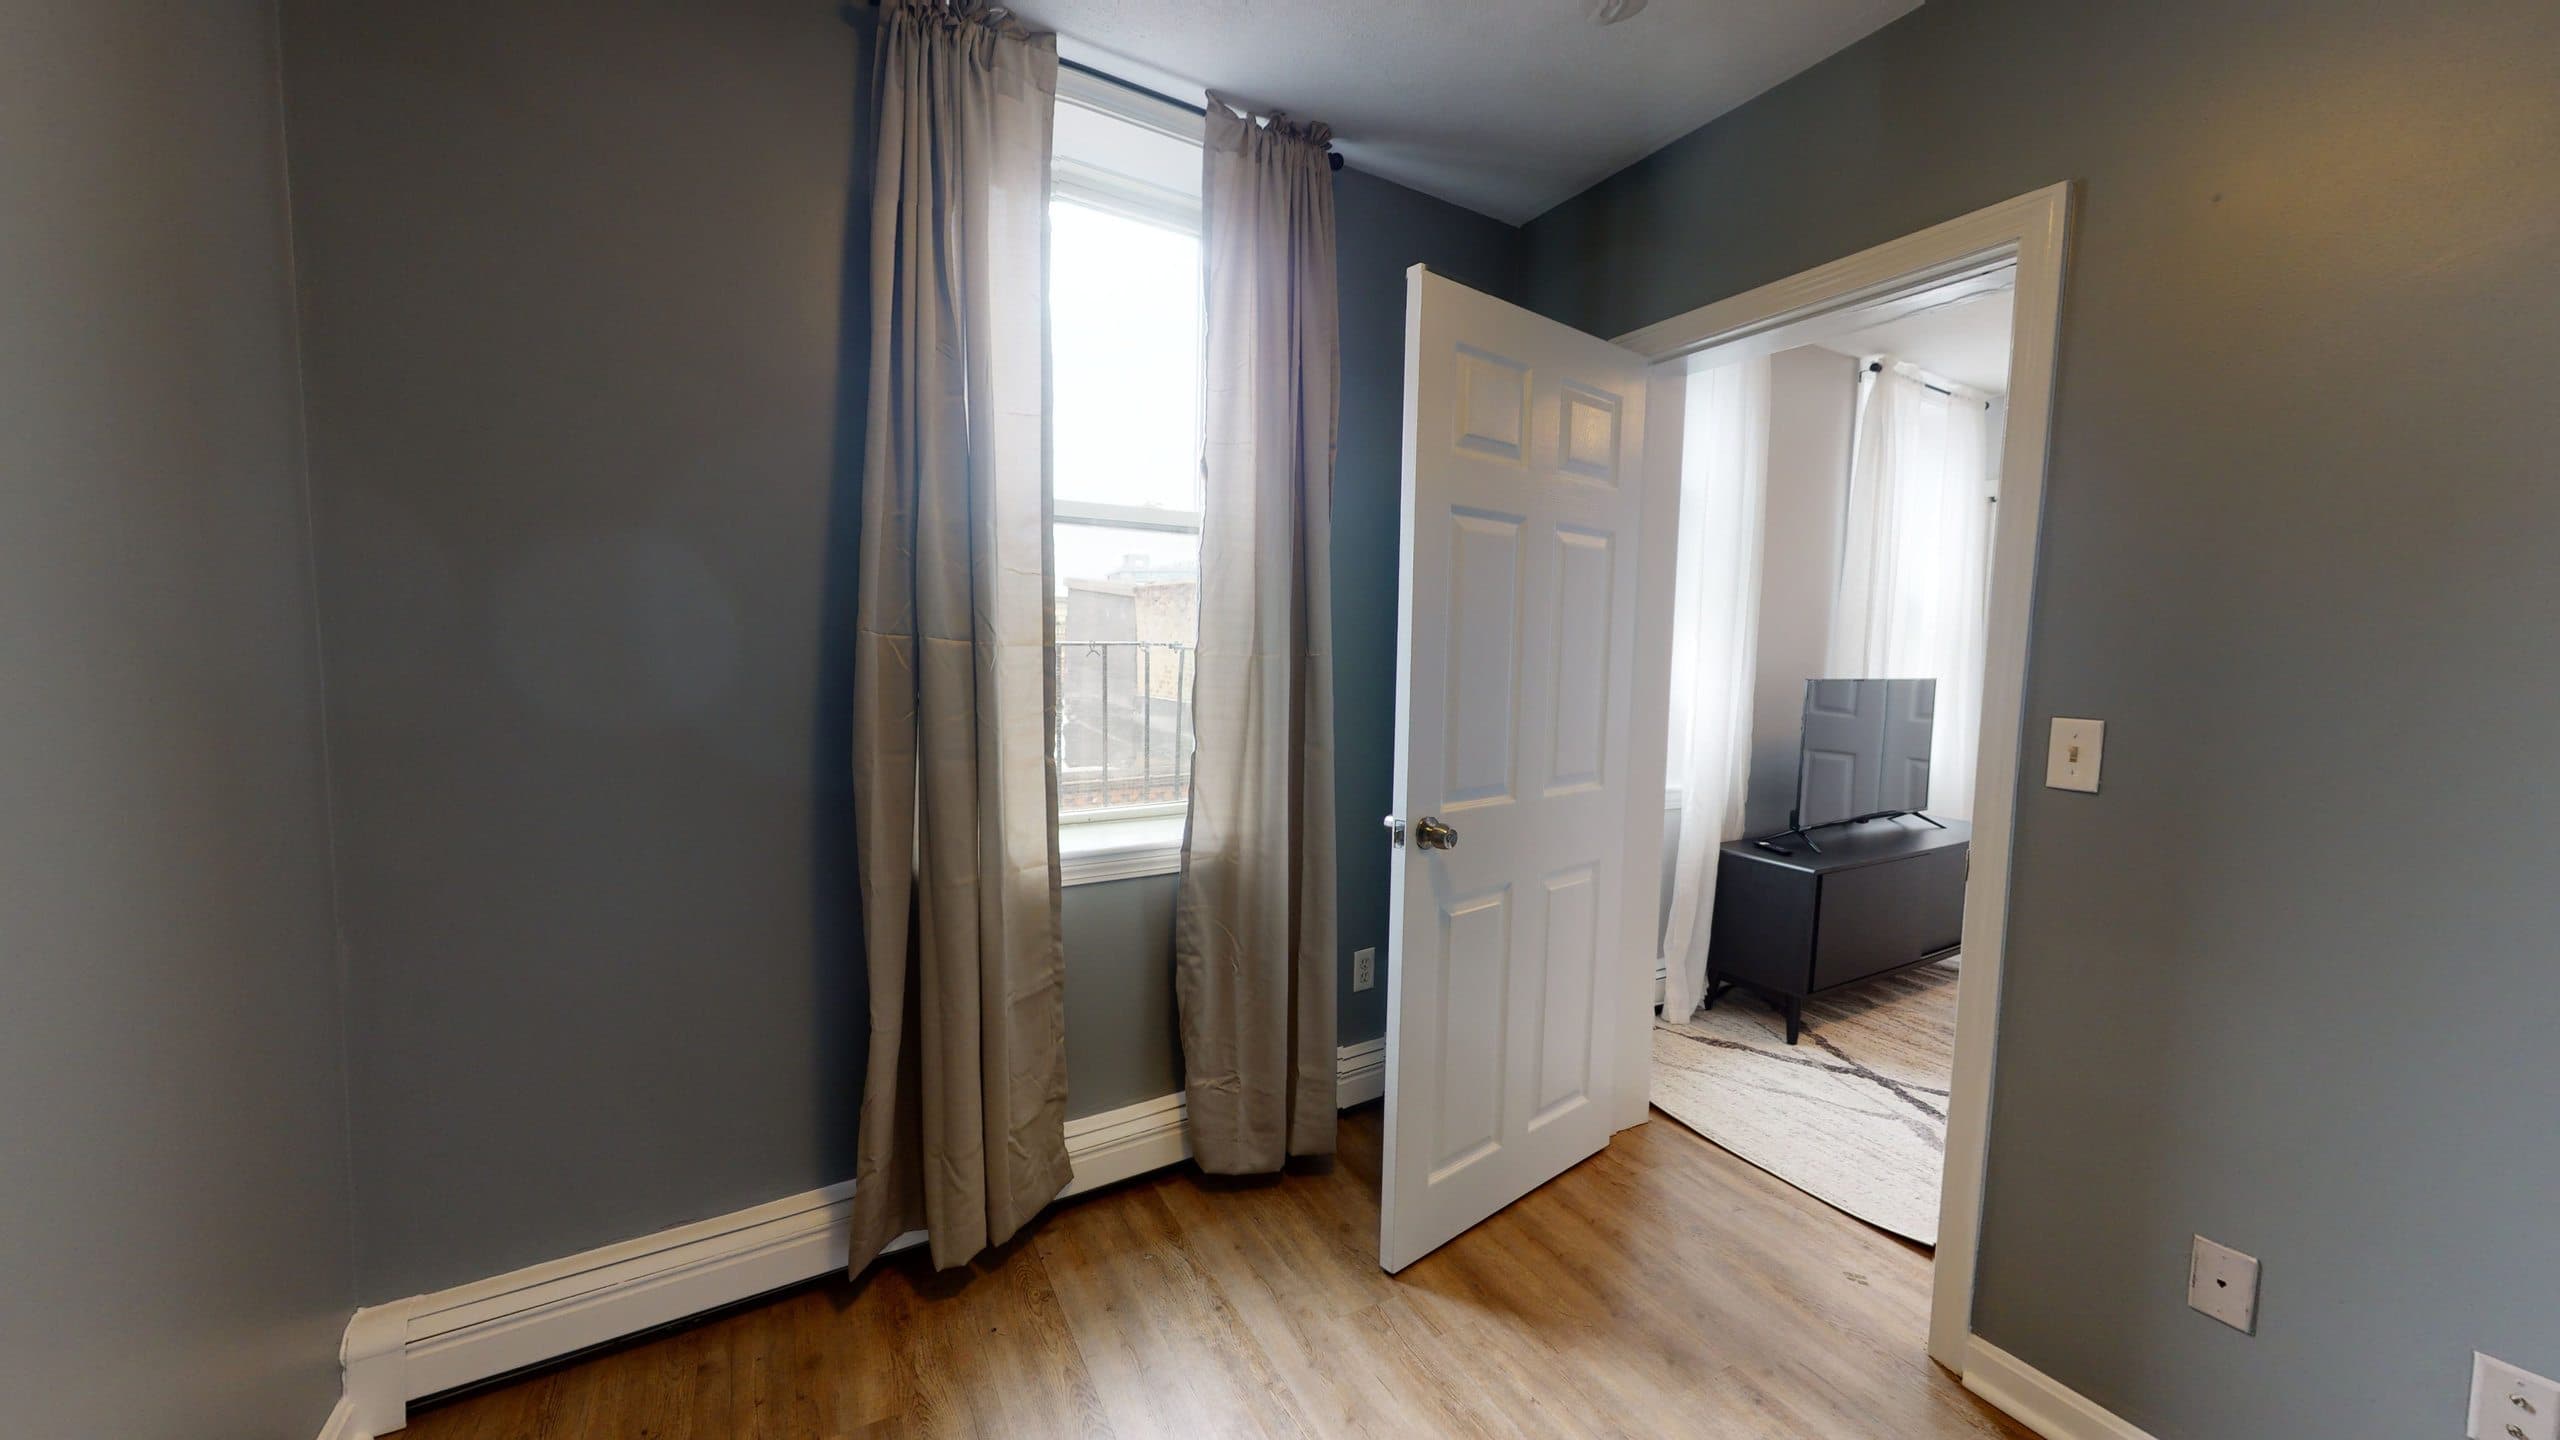 Photo 17 of #1281: Queen Bedroom A at June Homes